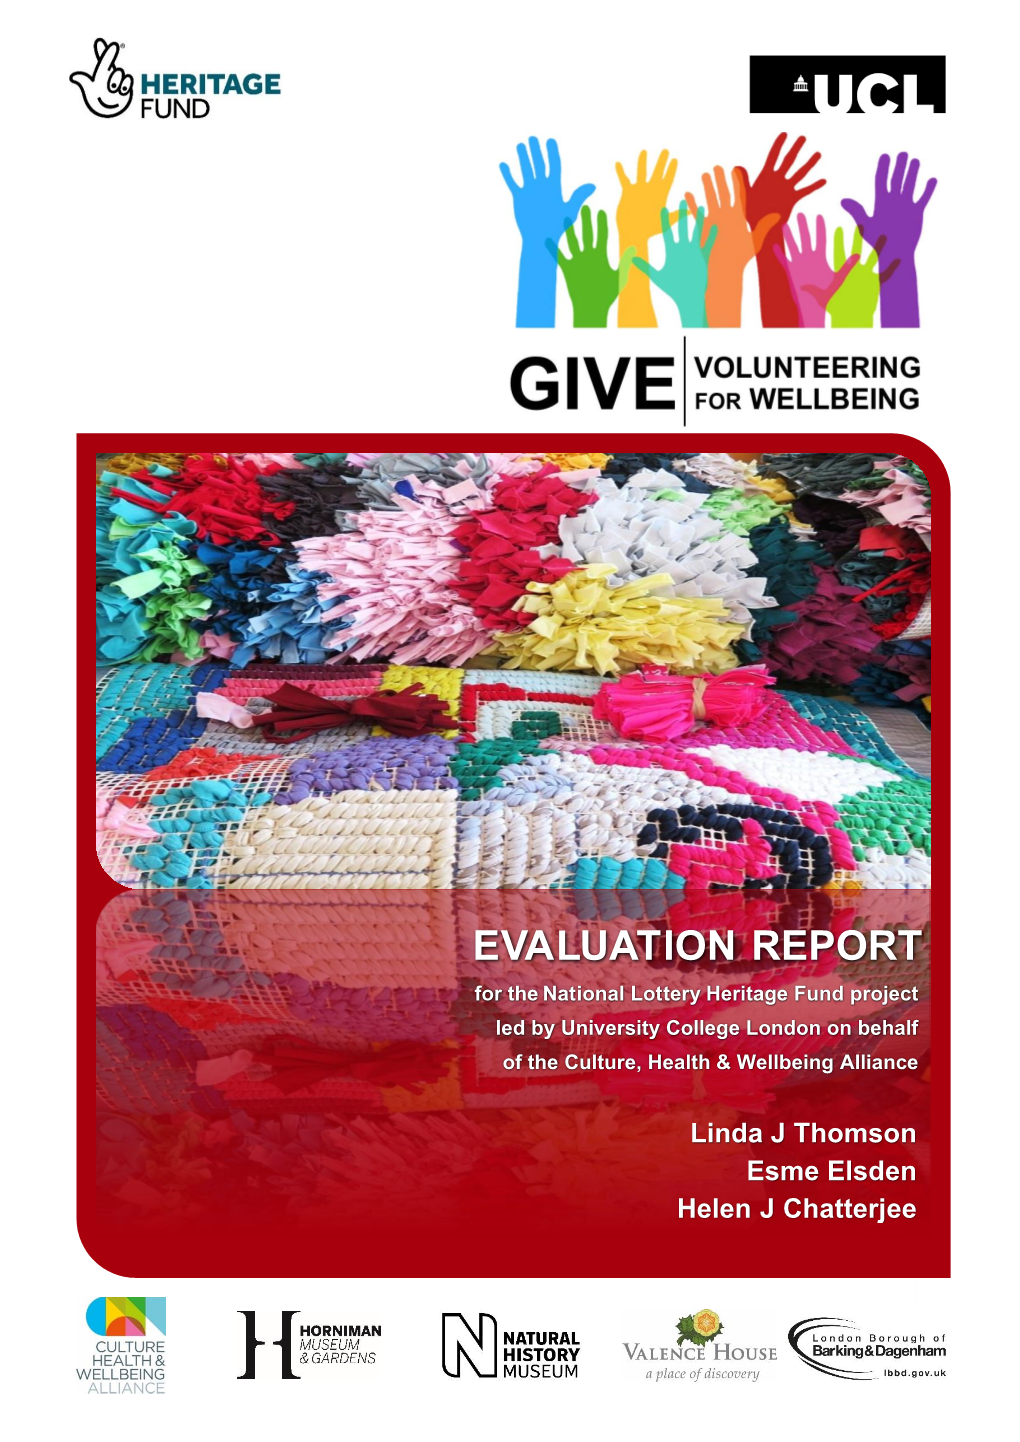 EVALUATION REPORT for the National Lottery Heritage Fund Project Led by University College London on Behalf of the Culture, Health & Wellbeing Alliance